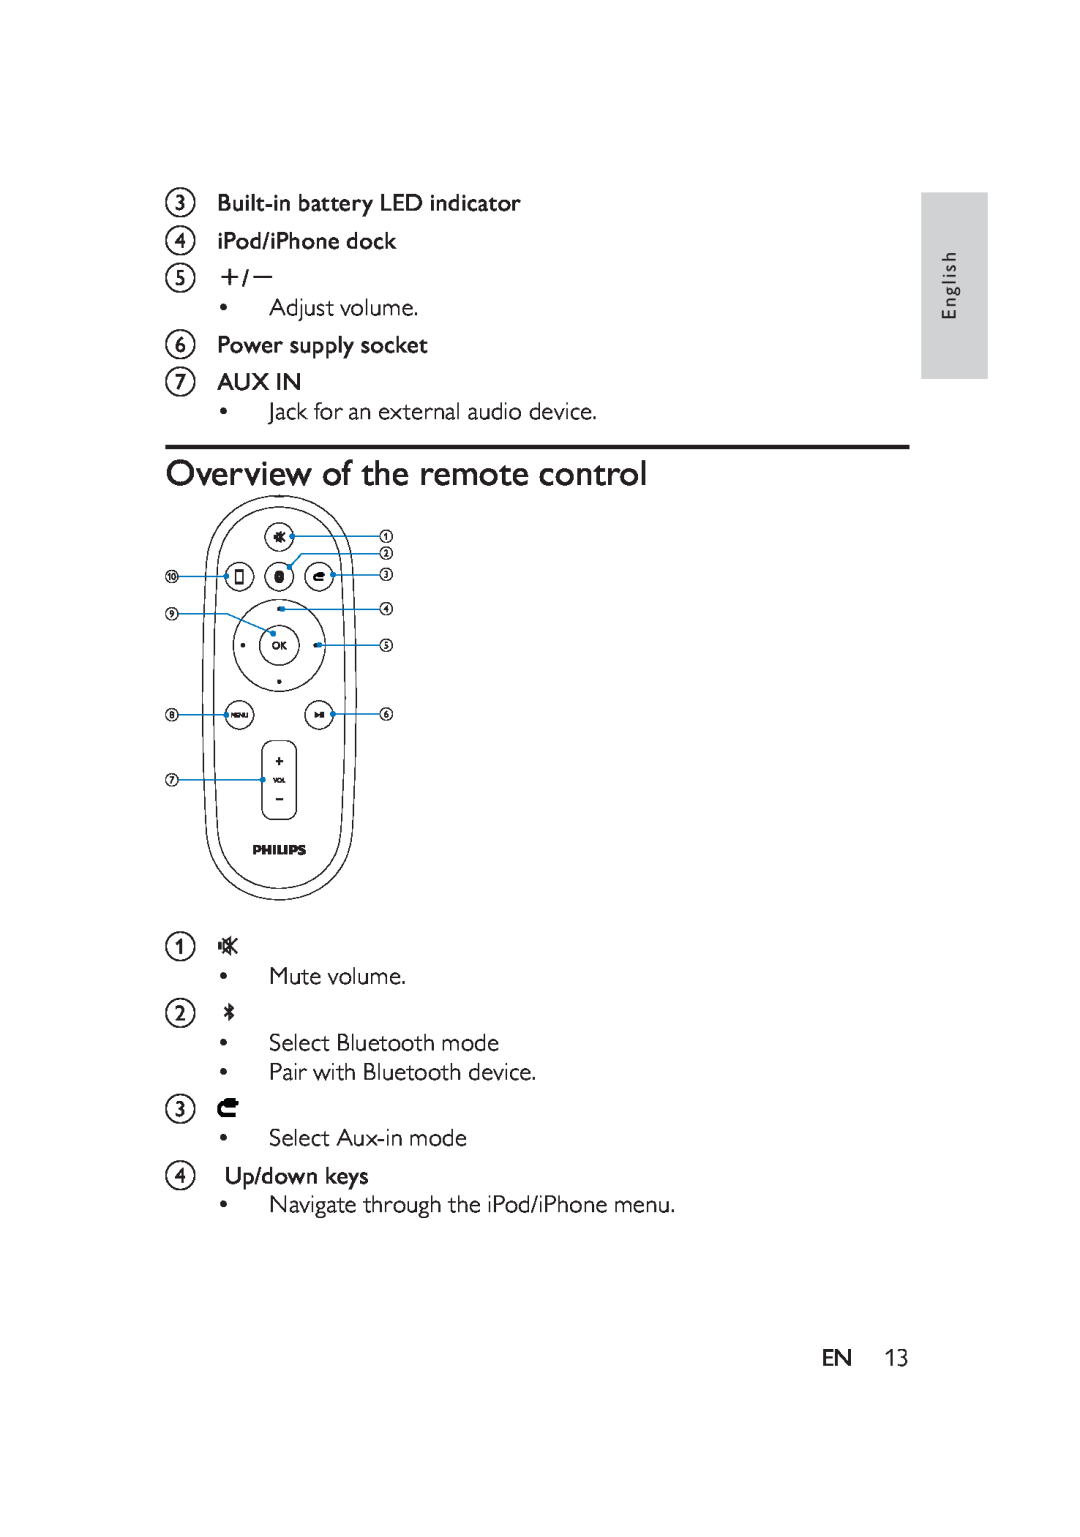 Philips DS8550 user manual Overview of the remote control, id e 